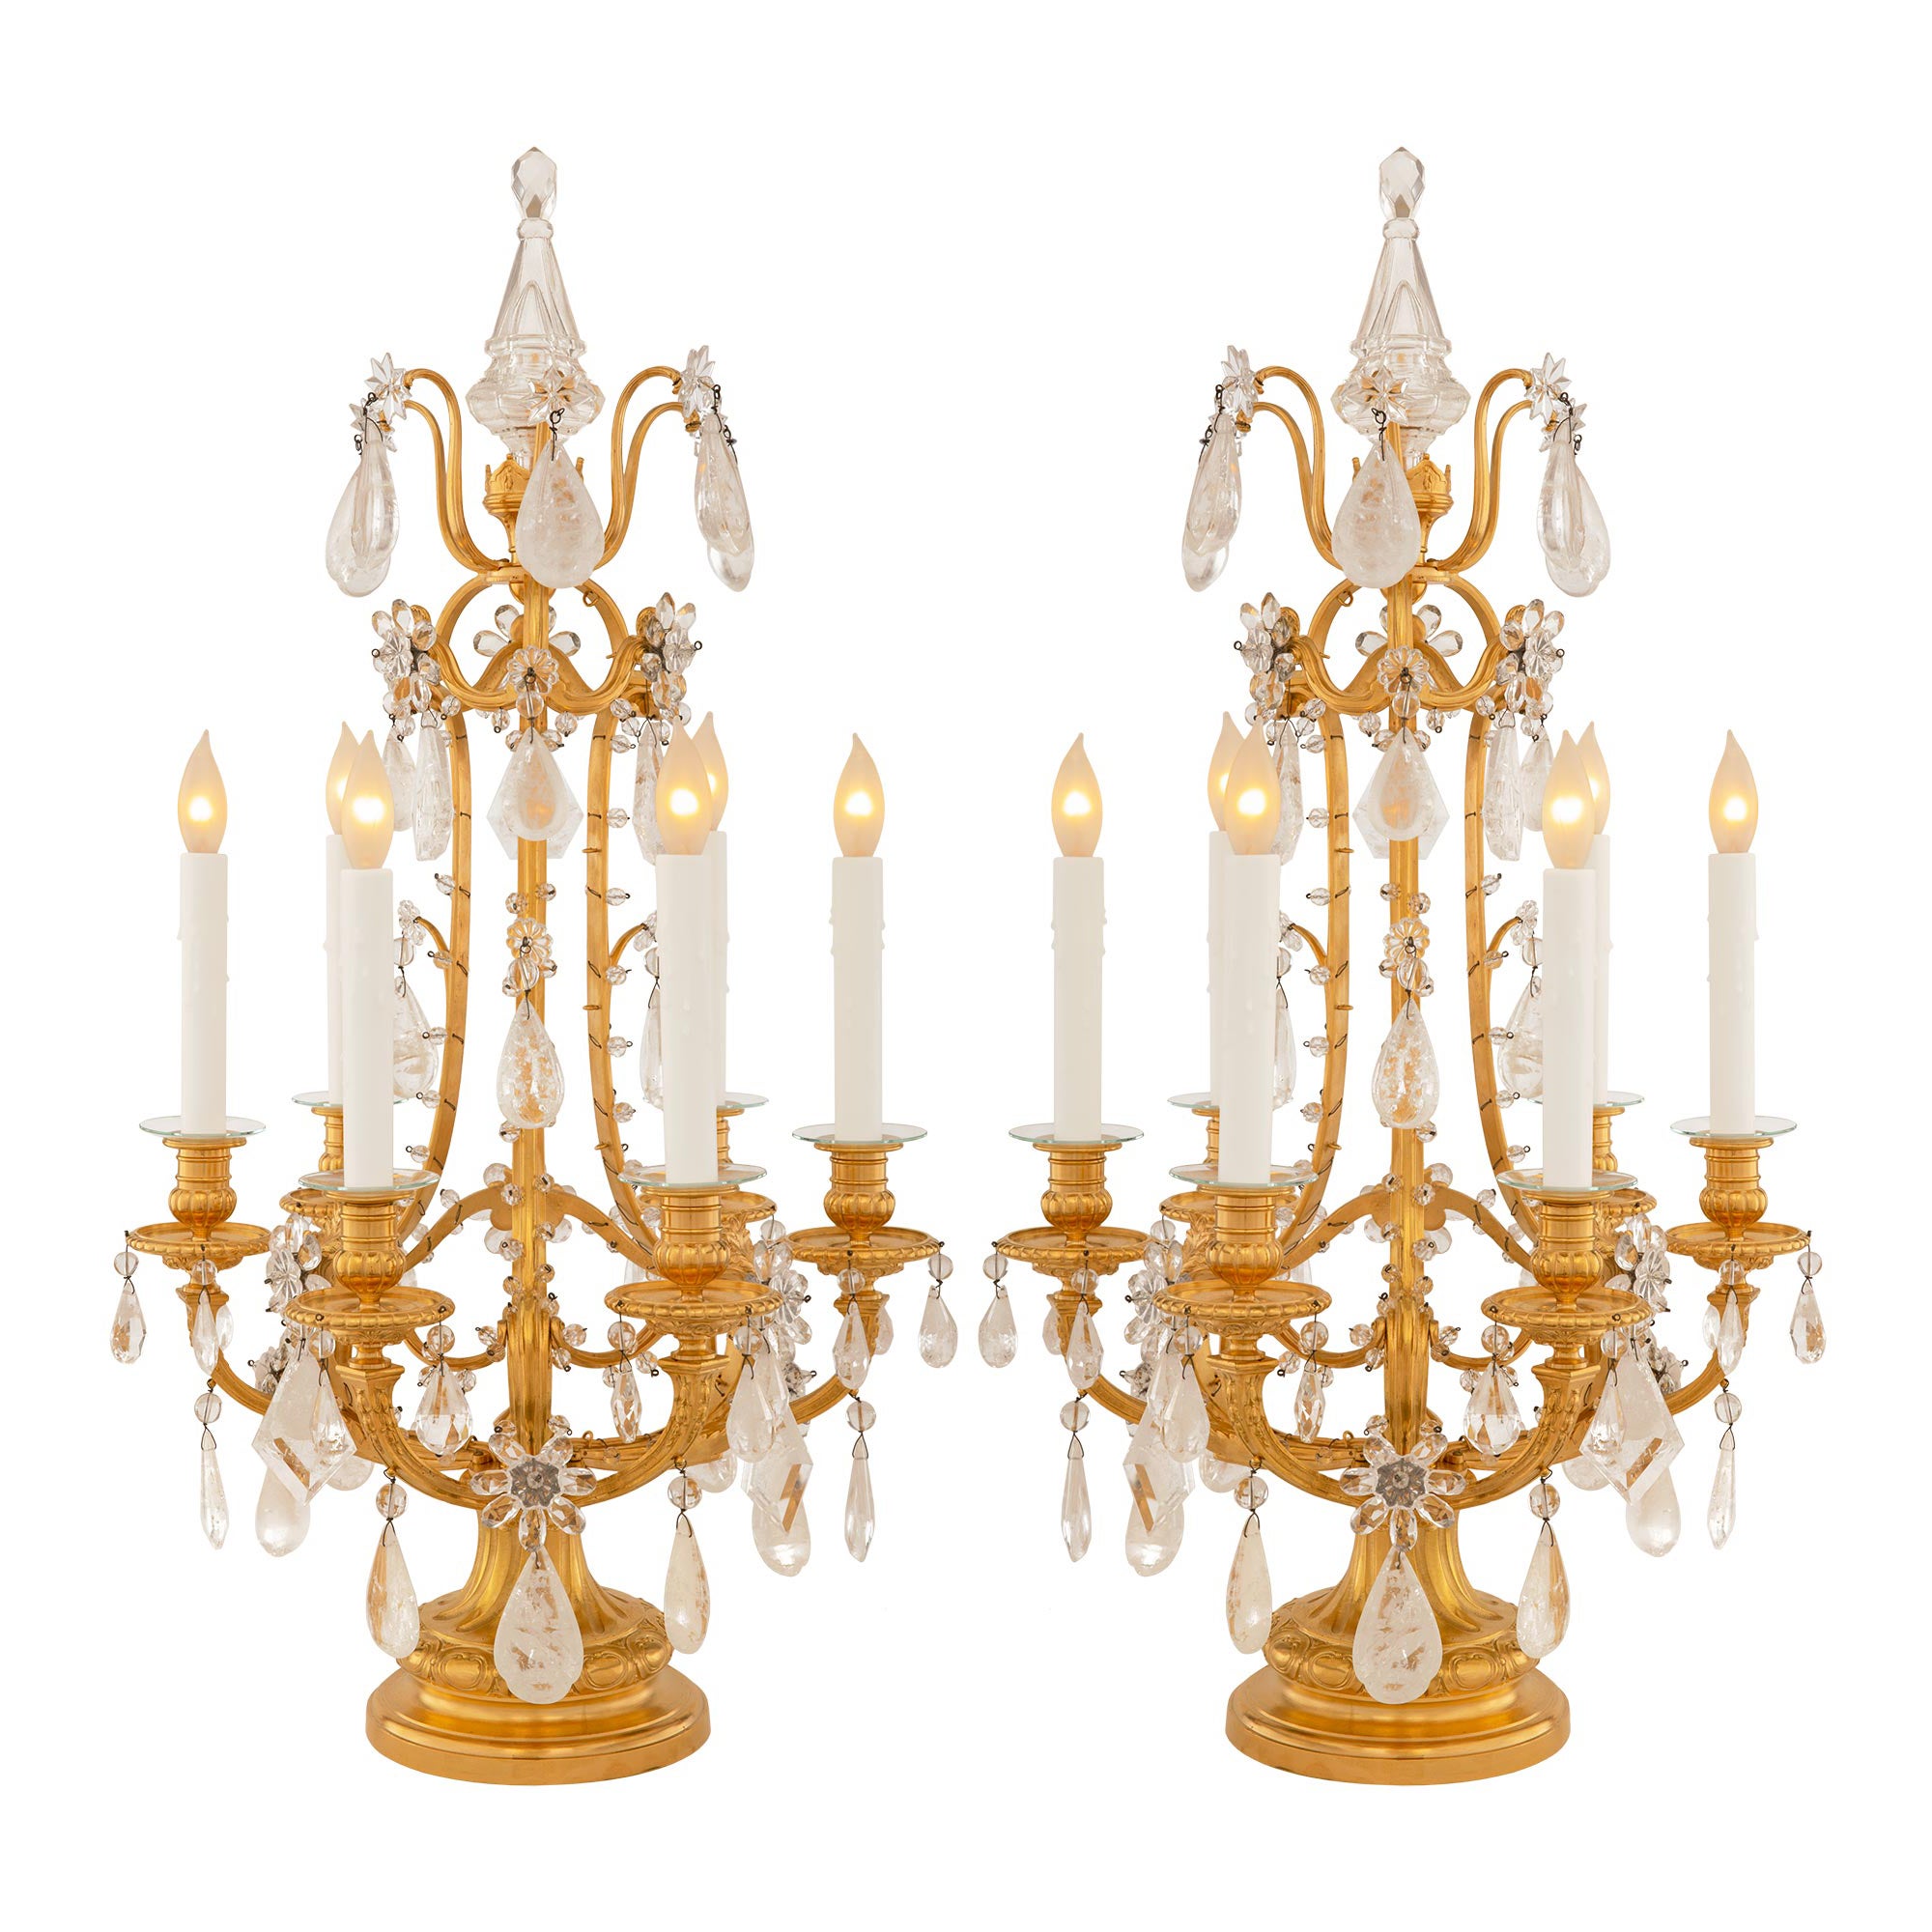 Pair Of French 19th Century Louis XVI St. Rock Crystal & Crystal Girandole Lamps For Sale